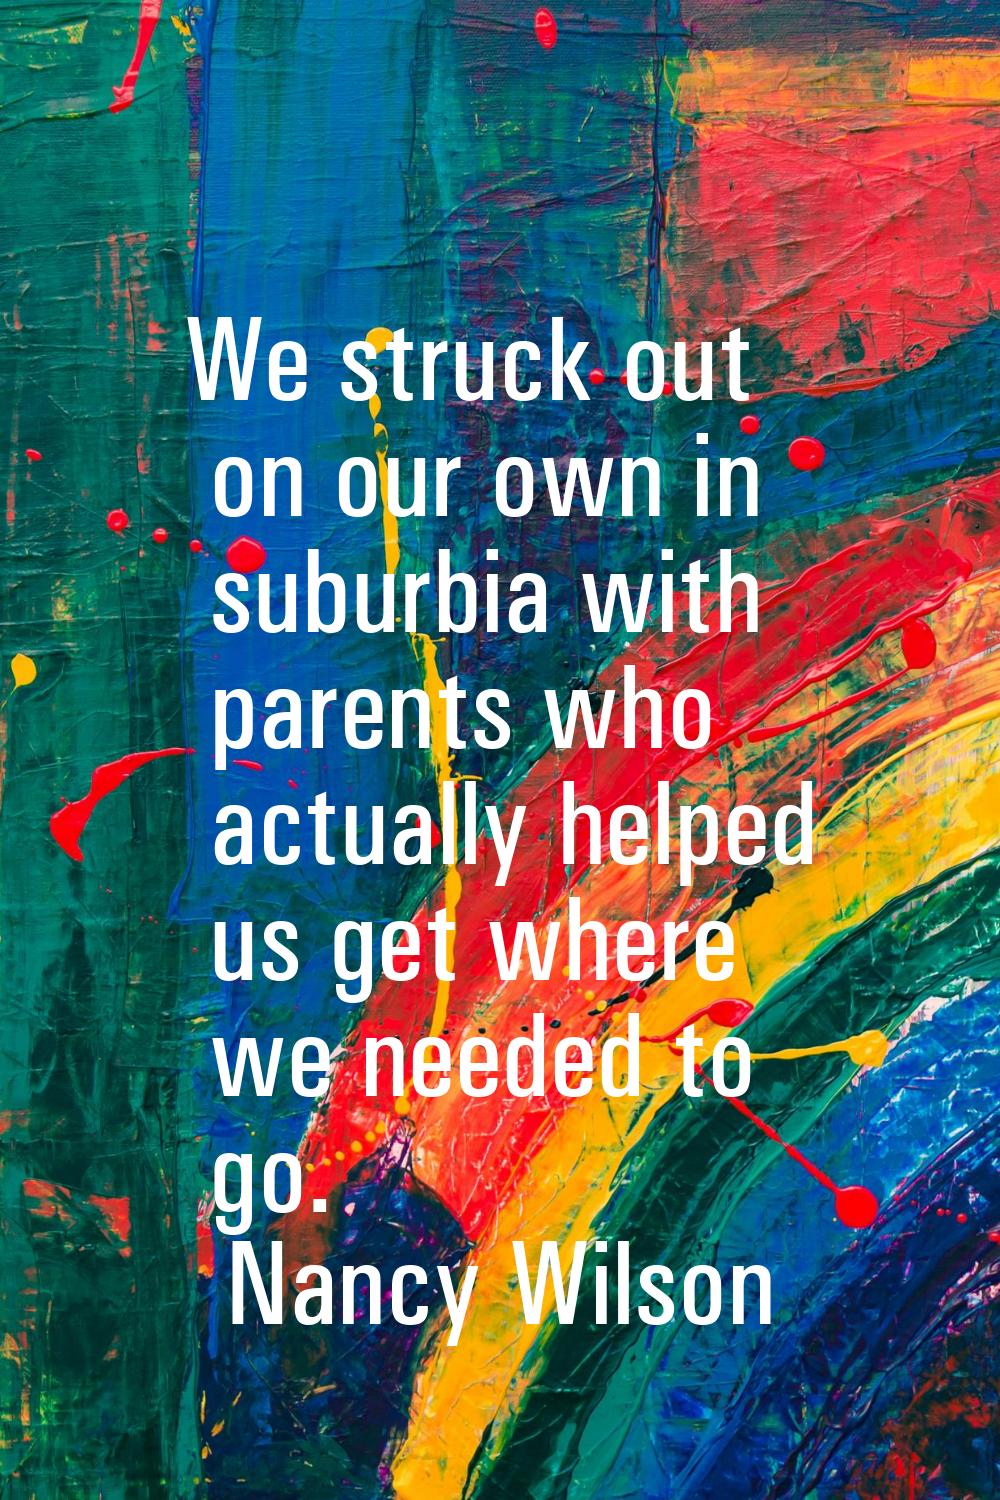 We struck out on our own in suburbia with parents who actually helped us get where we needed to go.